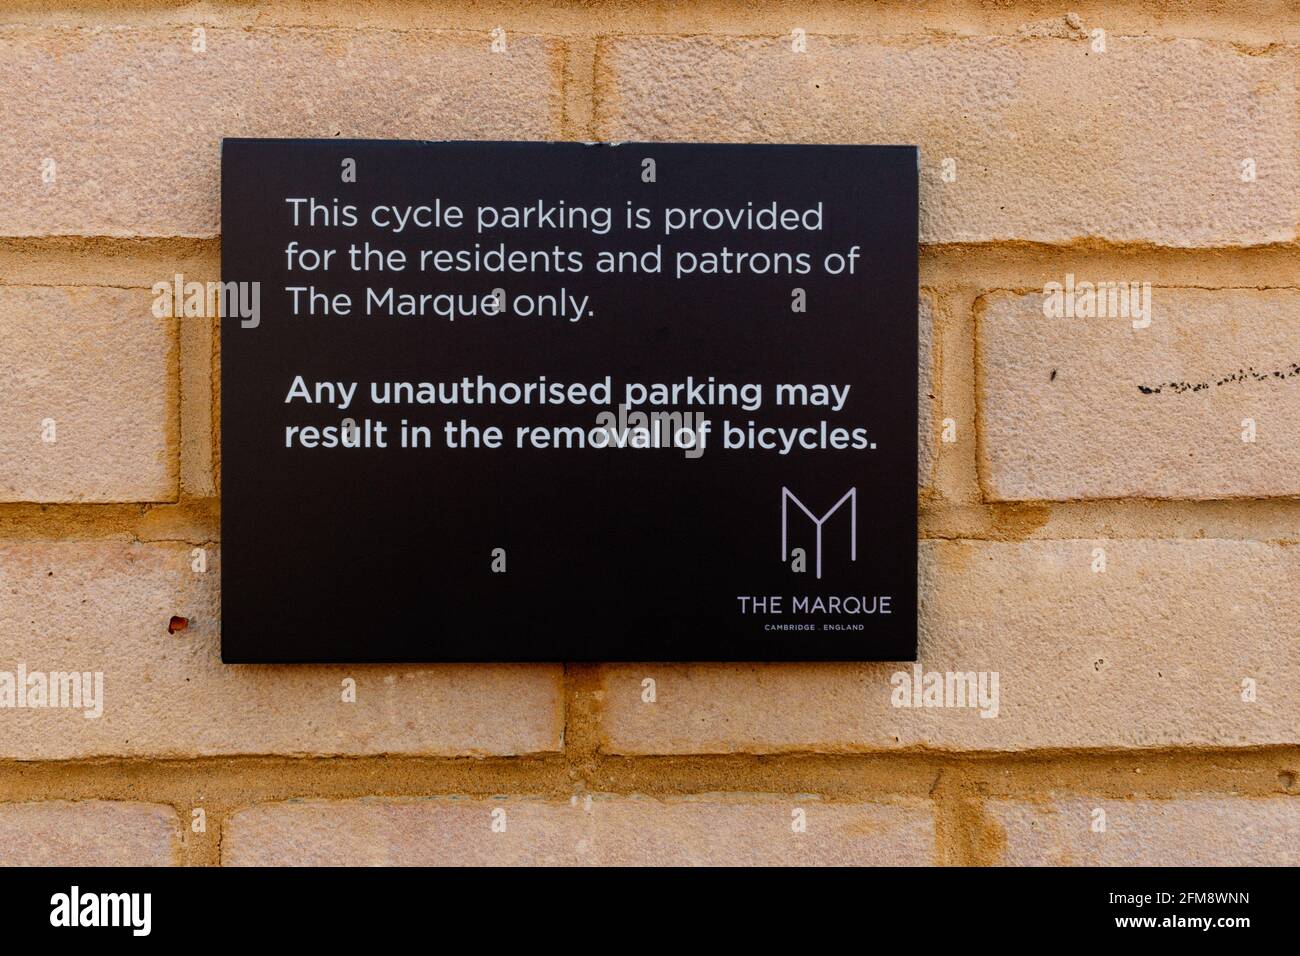 A sign on a brick wall - cycle parking at this location is for residents of The Marque (apartment block) only. Stock Photo